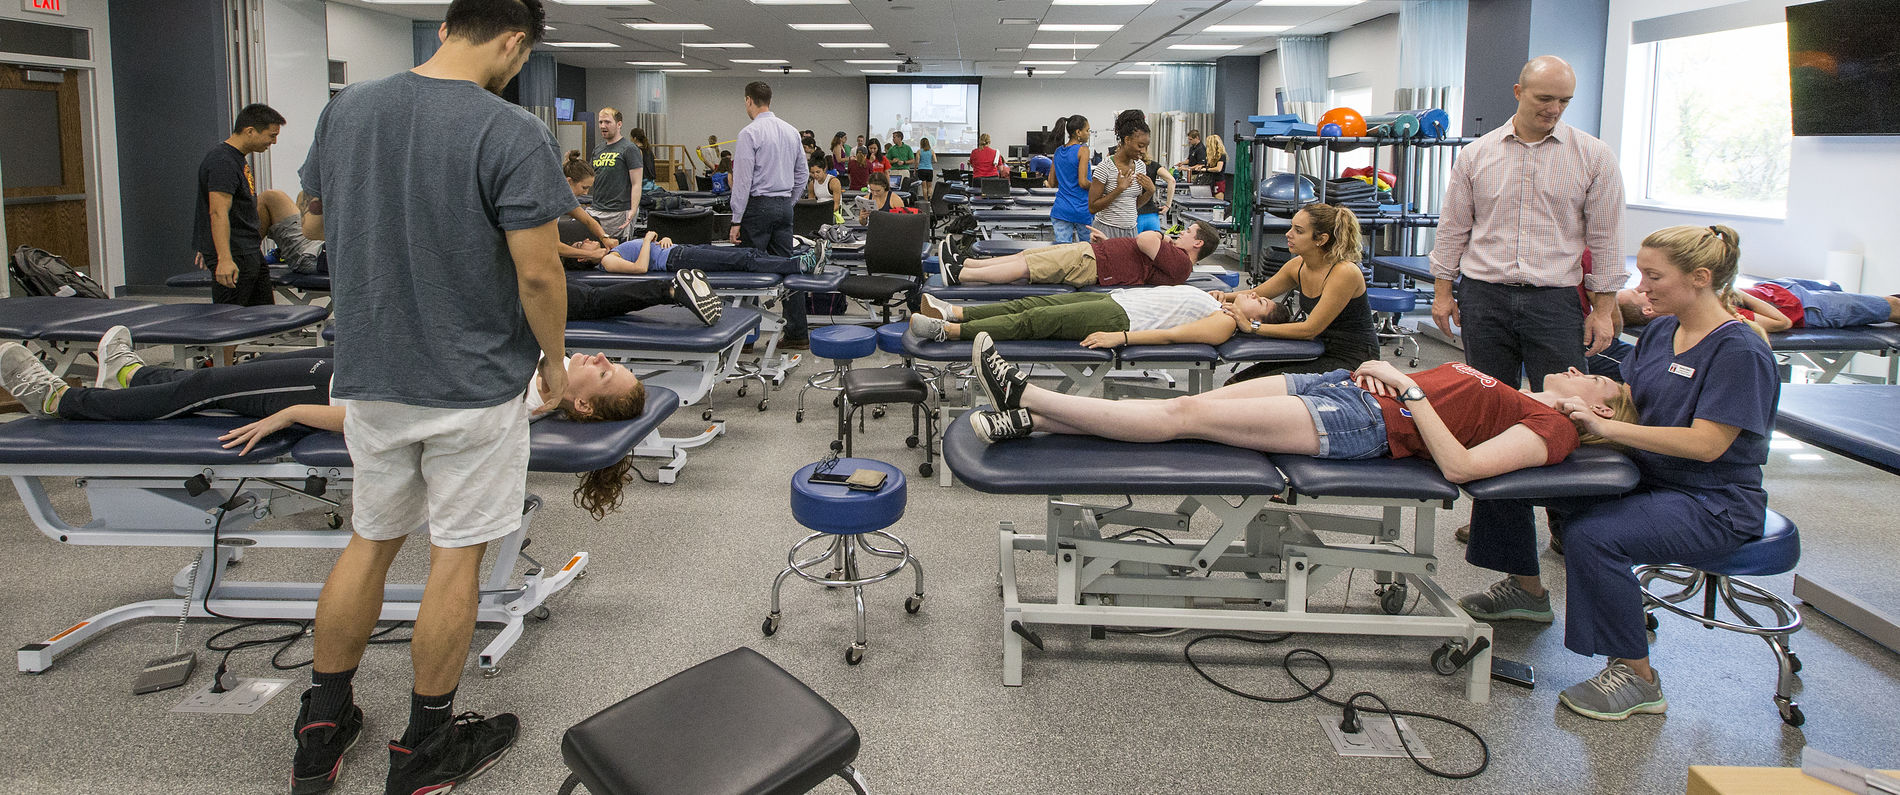 Physical therapy students examining patients on tables